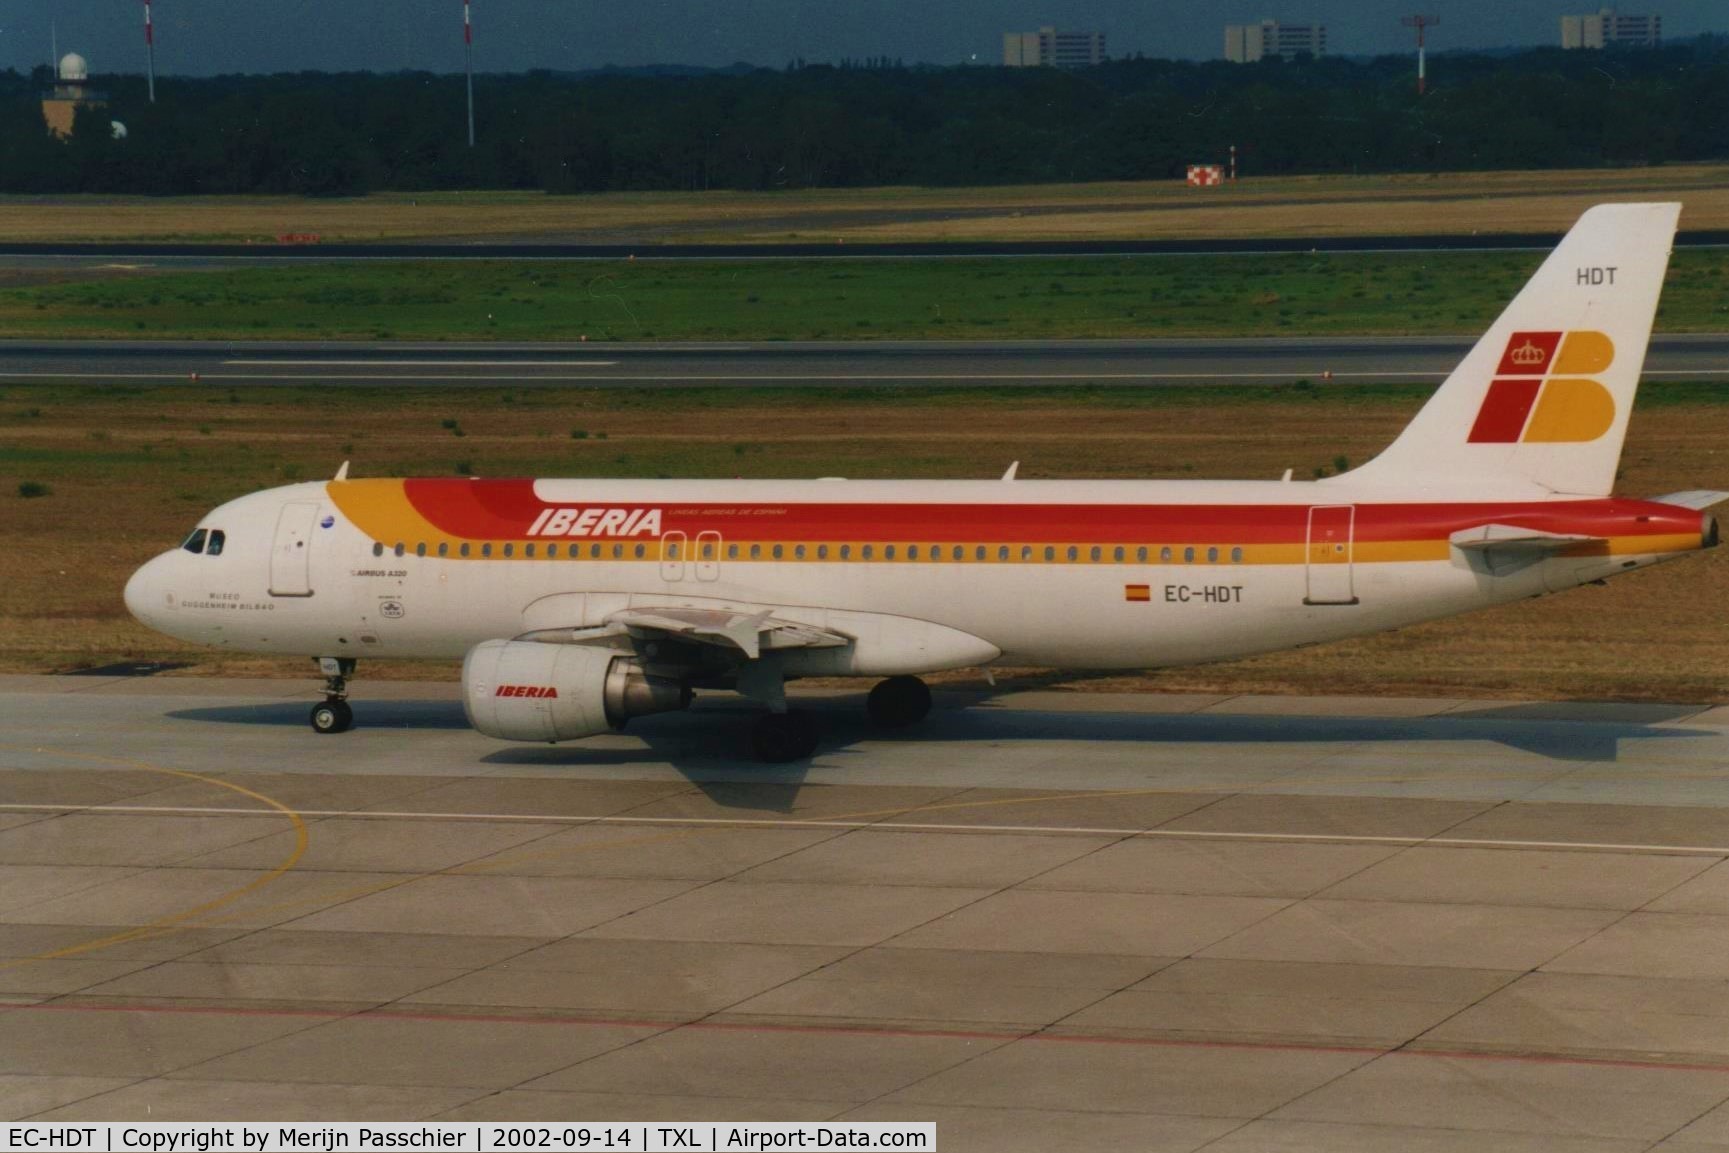 EC-HDT, 1999 Airbus A320-214 C/N 1119, bought photo